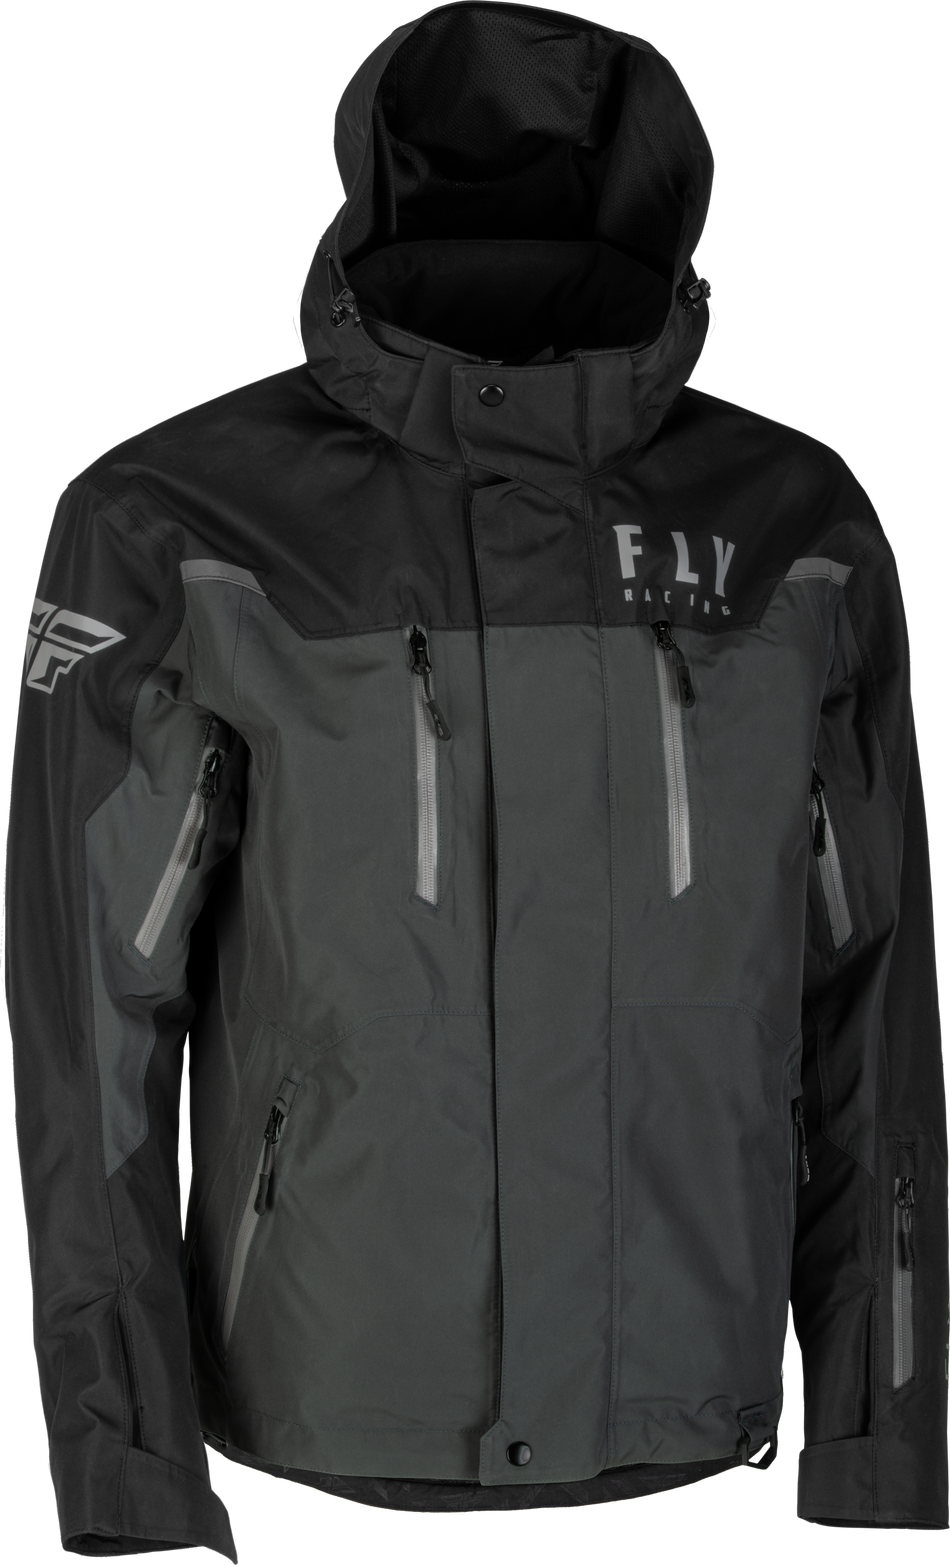 FLY RACING Incline Jacket Black/Charcoal Md 470-4103M